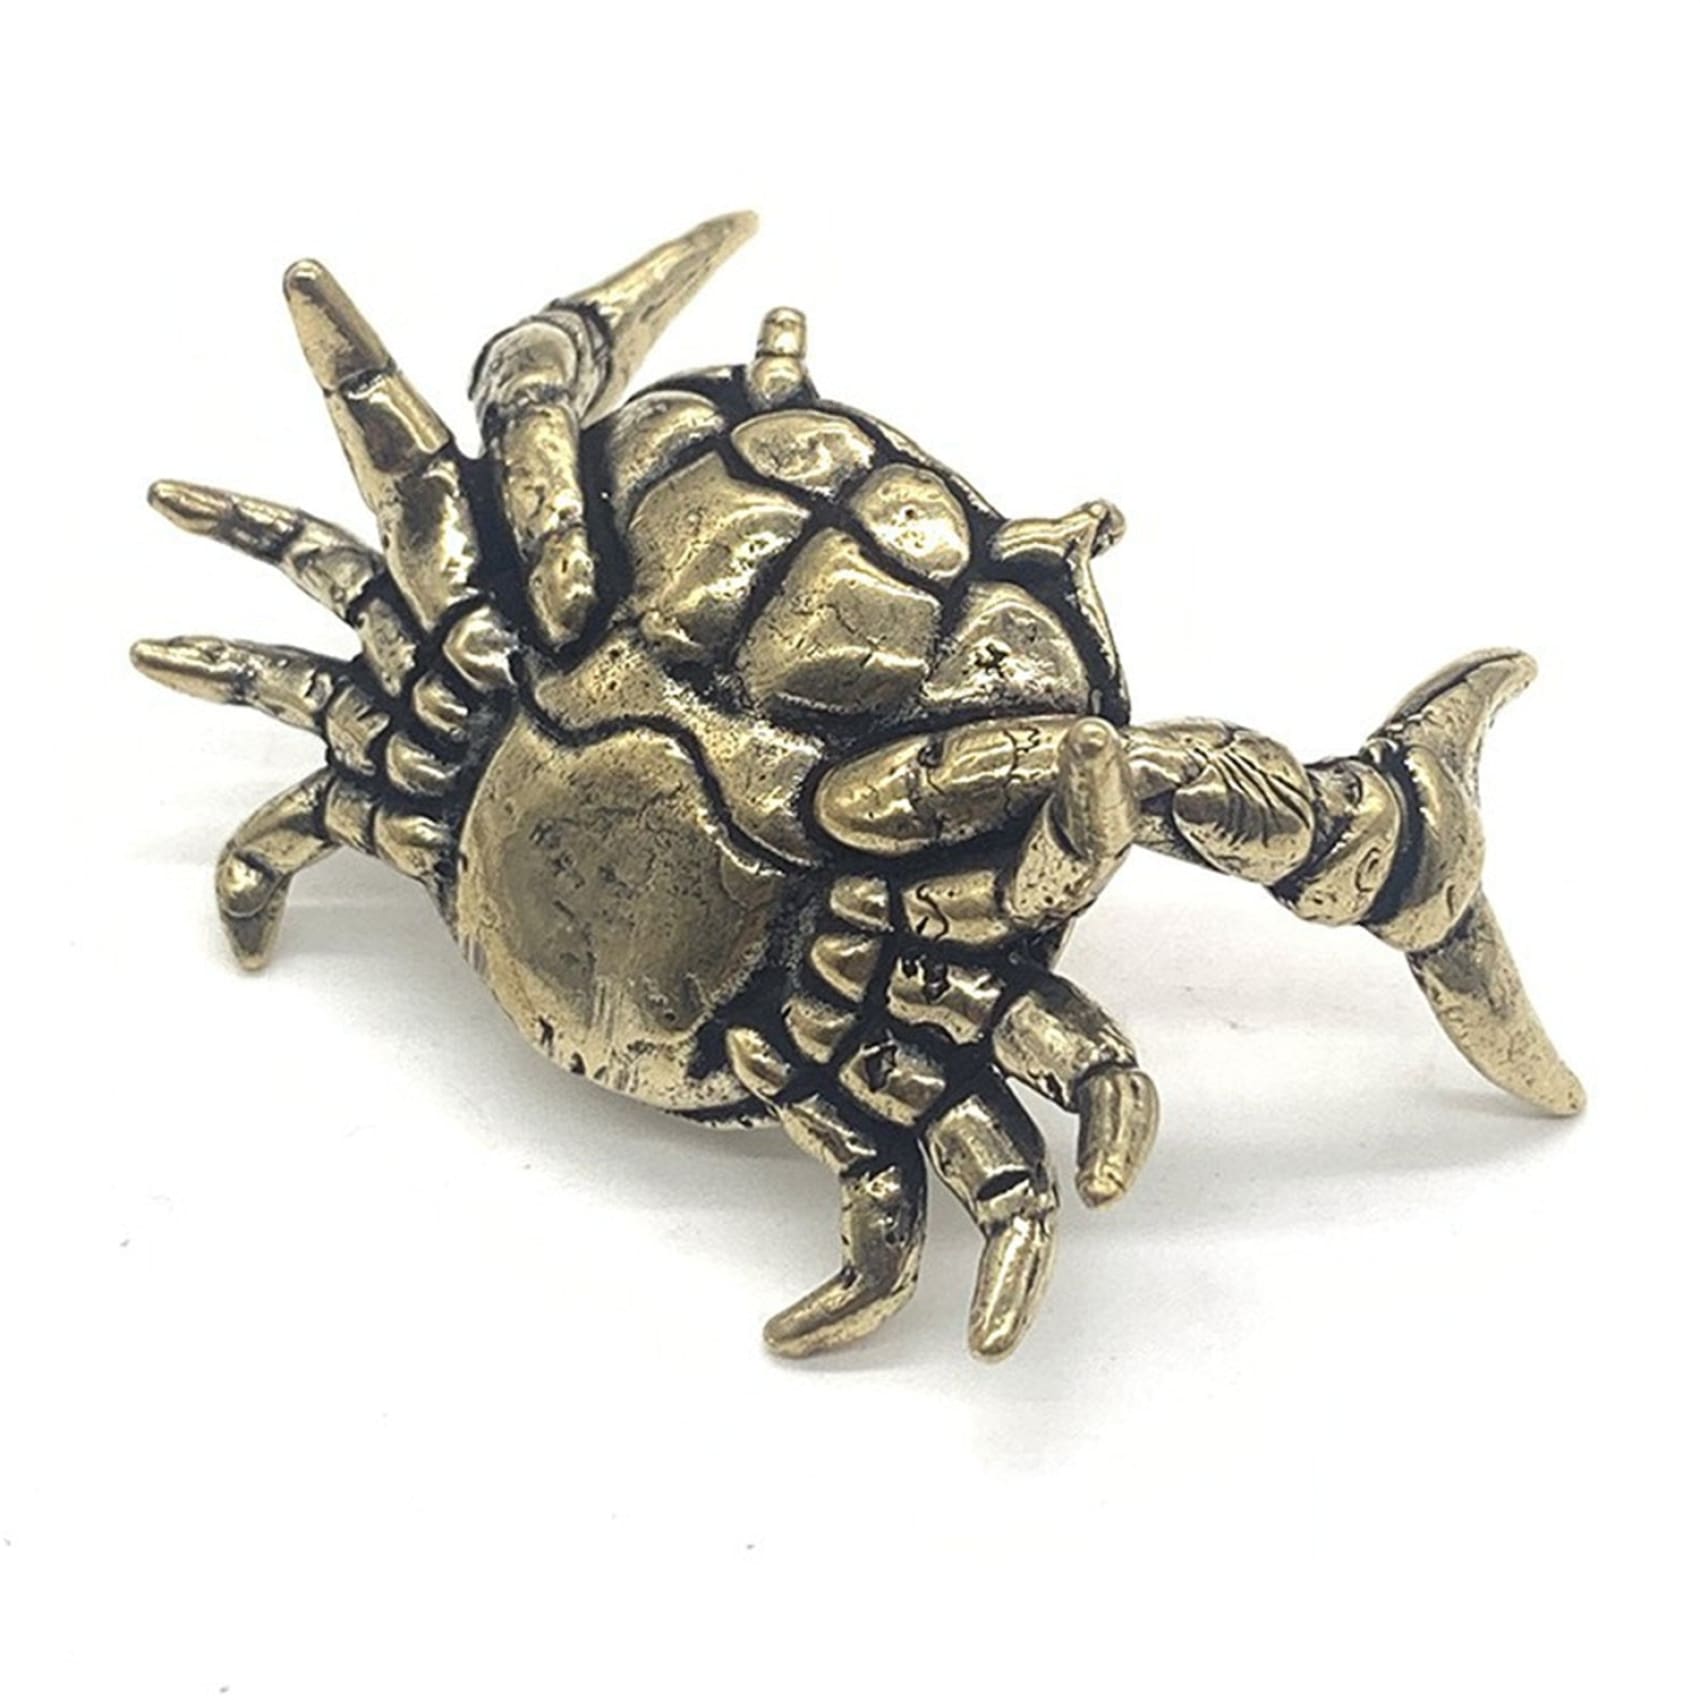 Weightlifting Crab Figurine,Tabletop Decoration Ornament,House Improvement Decor Statue,Kid Gifts - Brass Ornament